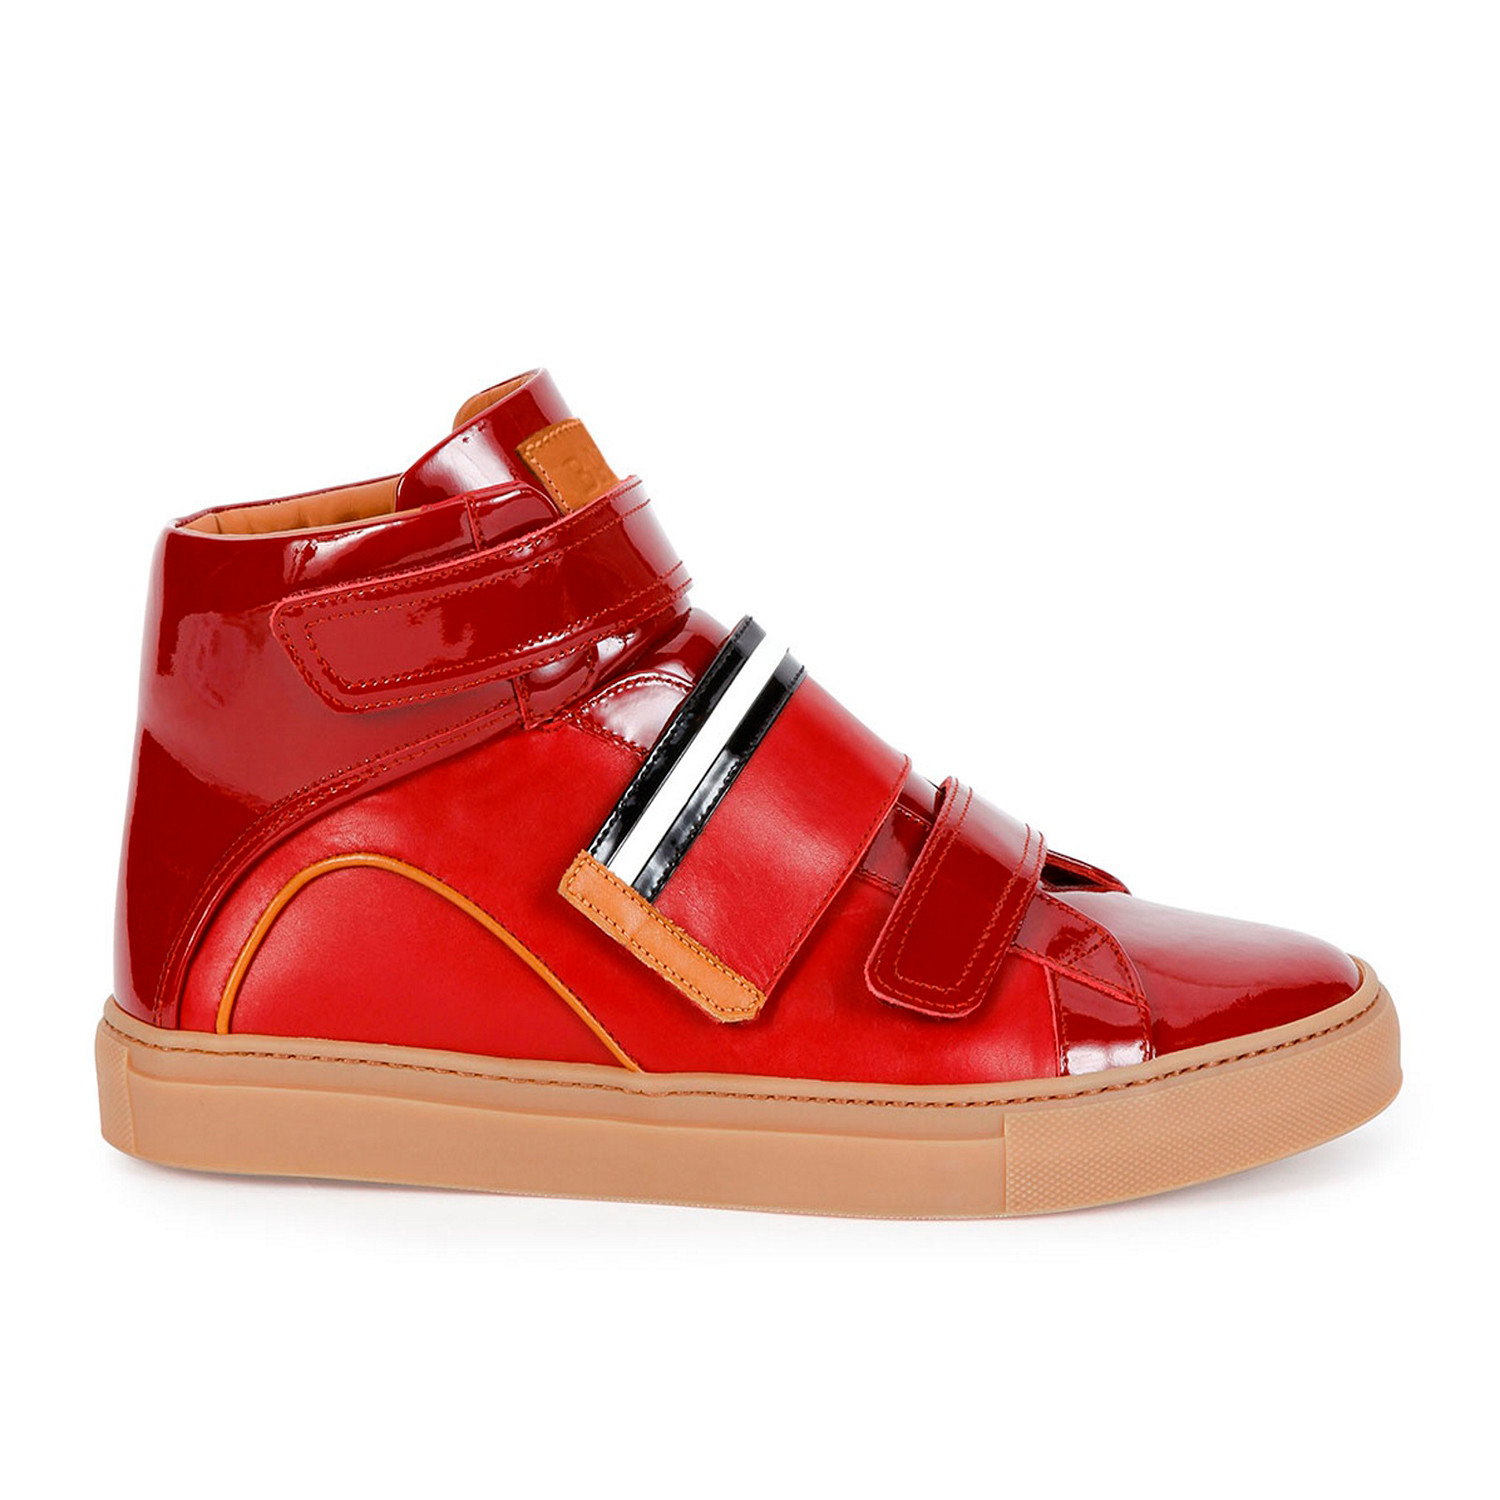 Bally // Herick Leather High-Top Sneakers // Red (US: 7) - Brioni ...